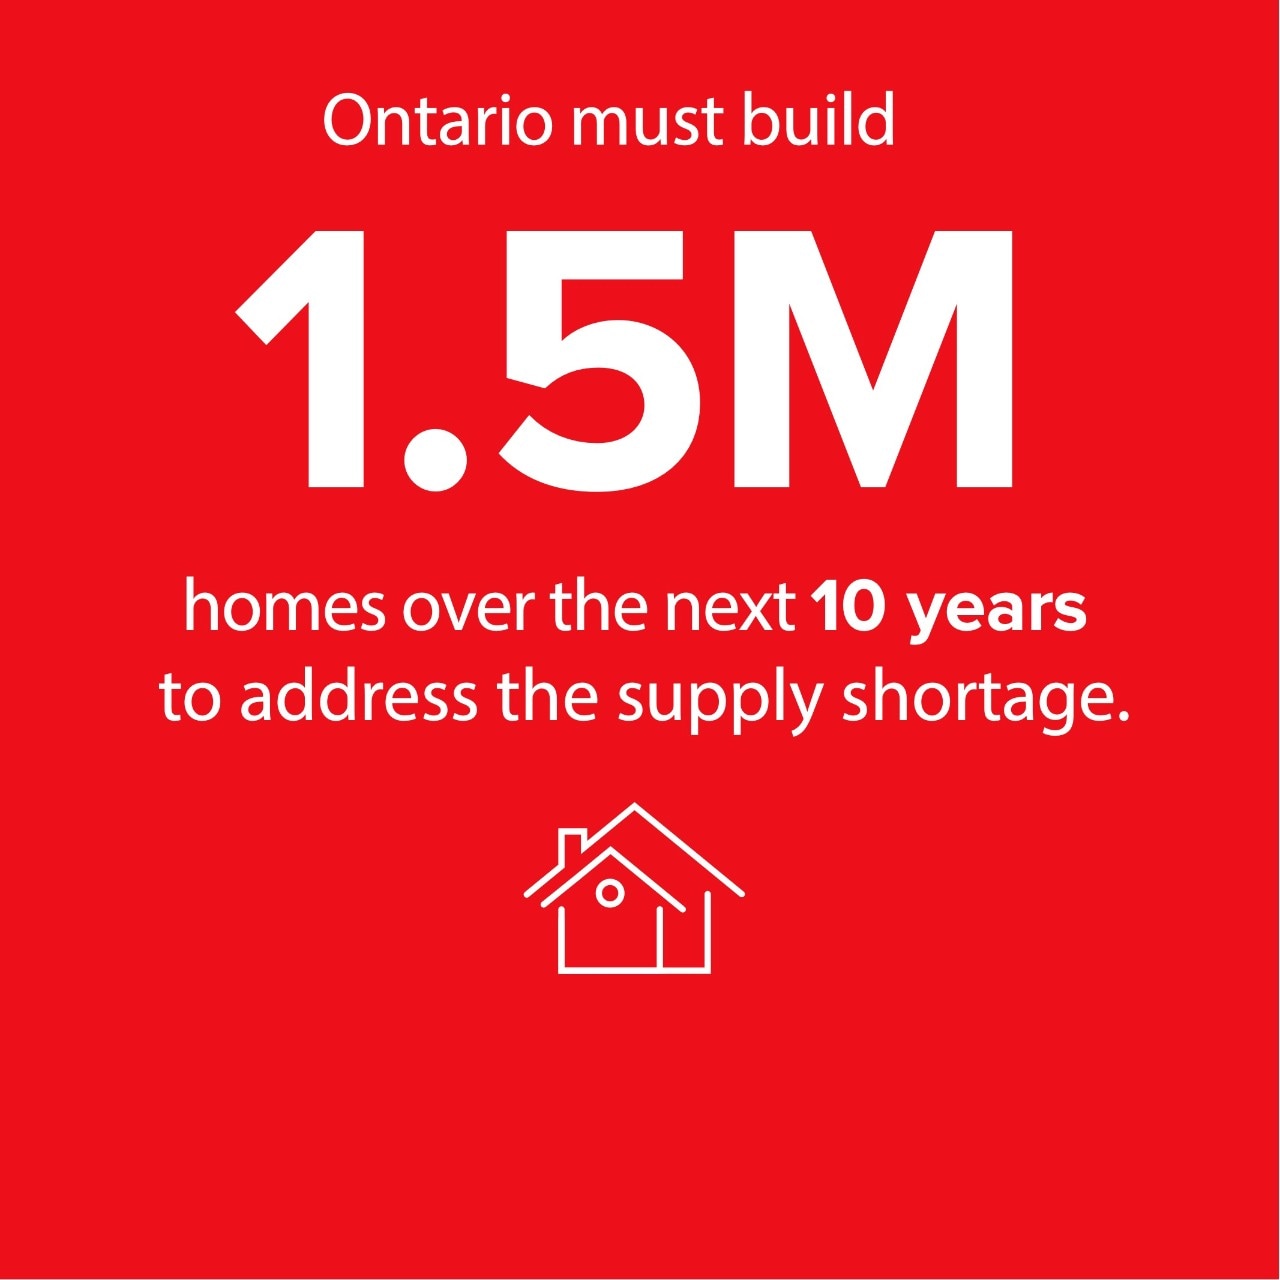 Ontario must build 1.5 million homes over the next 10 years to address the supply shortage.